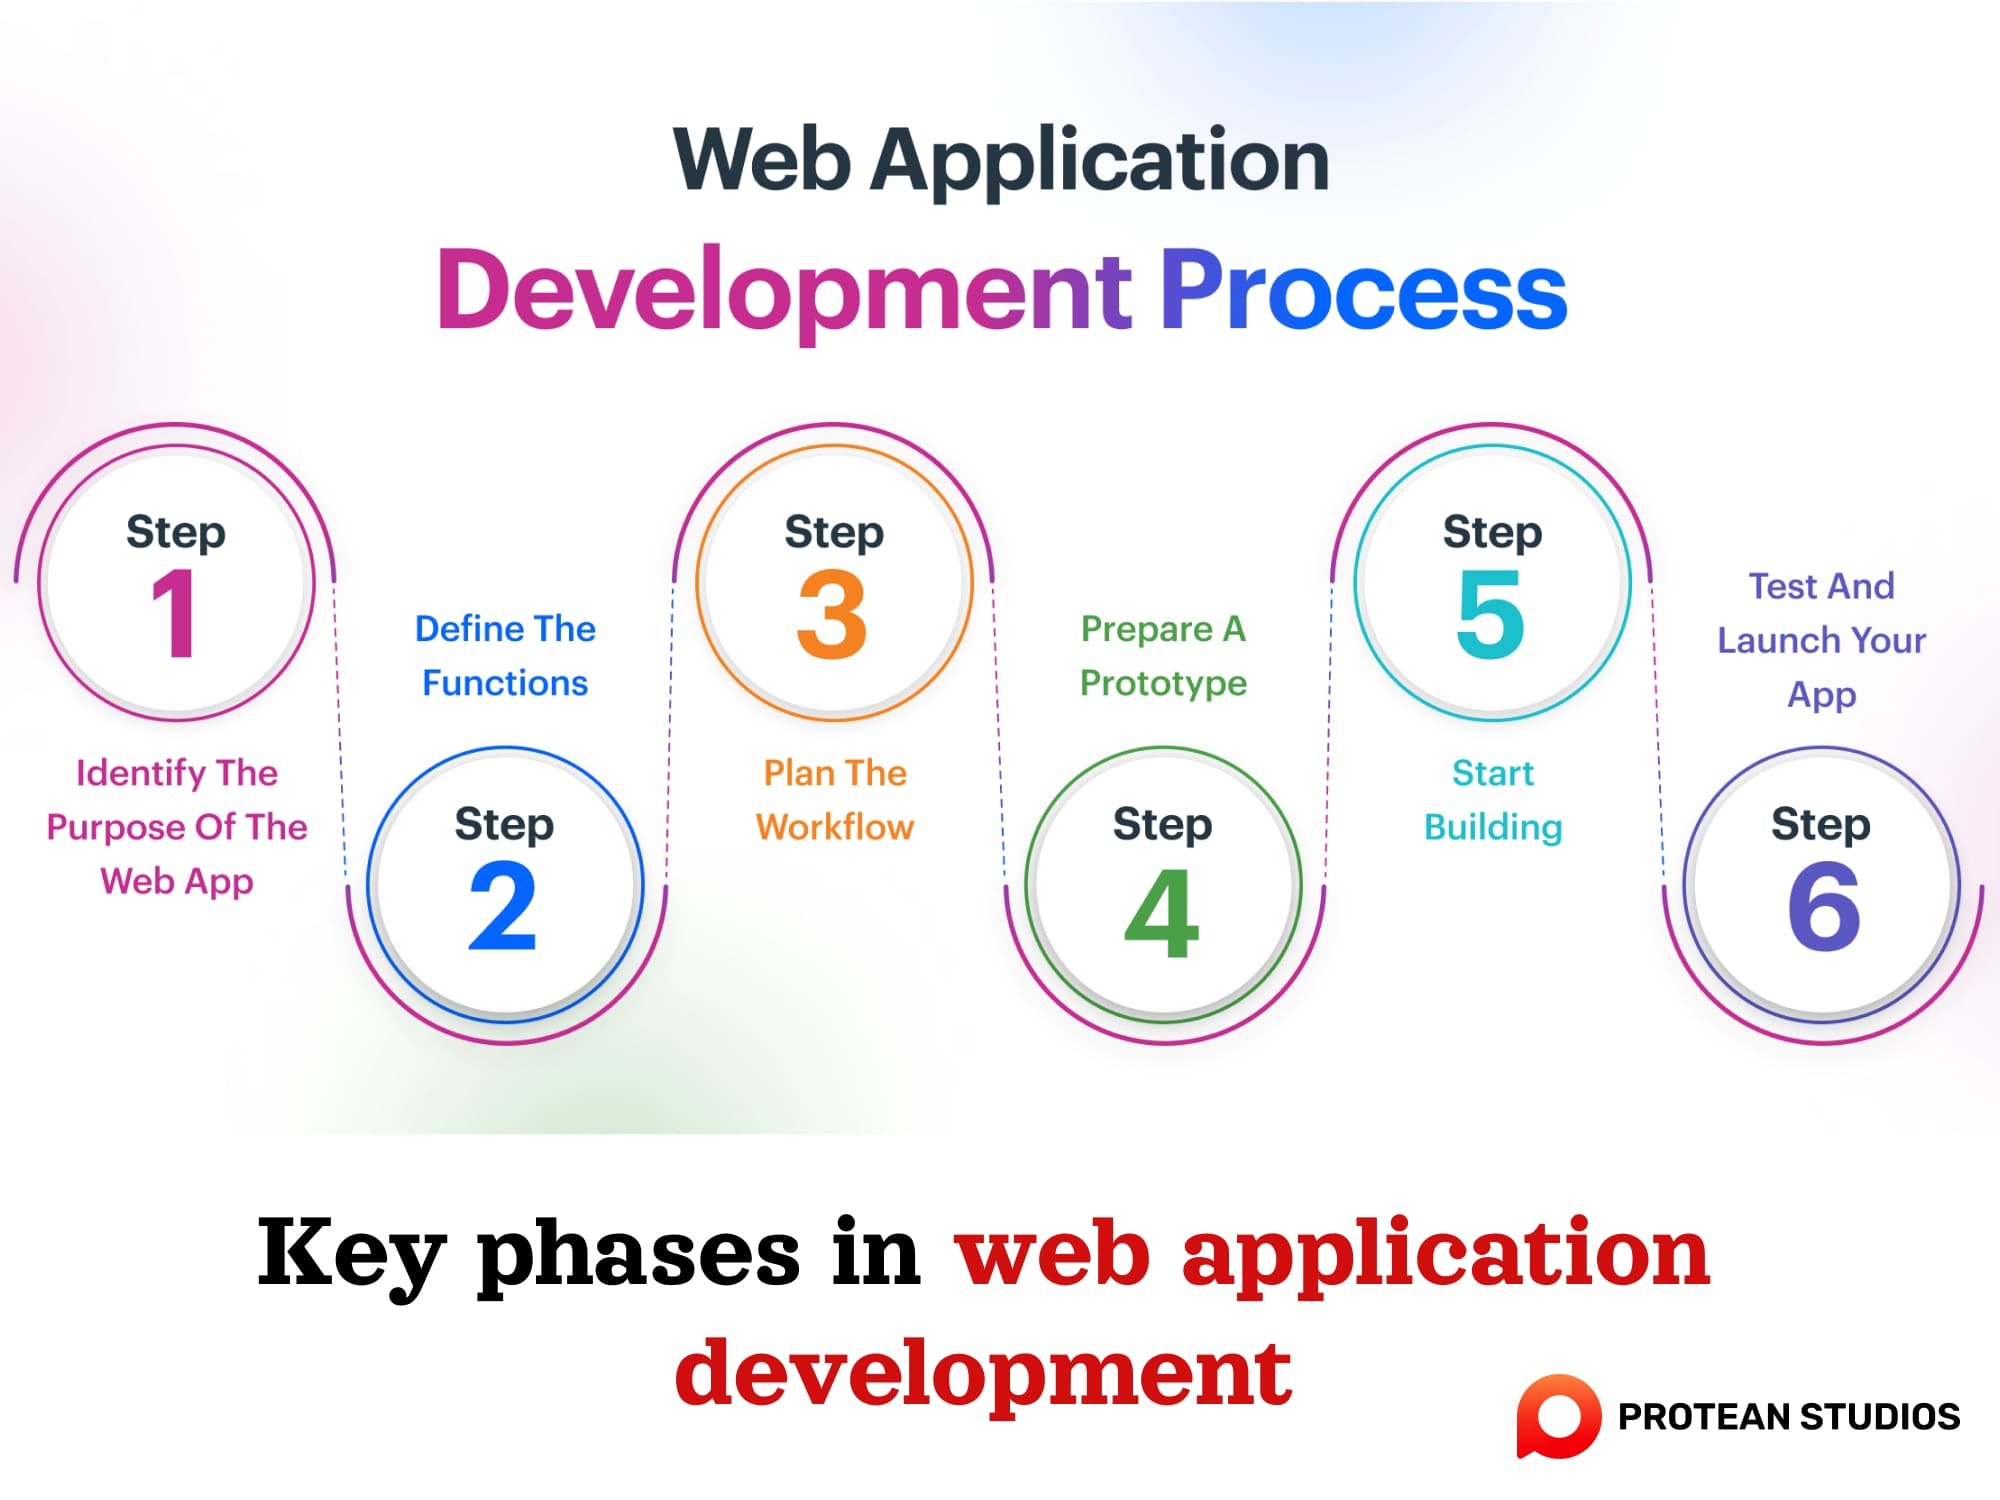 The main step in developing web apps